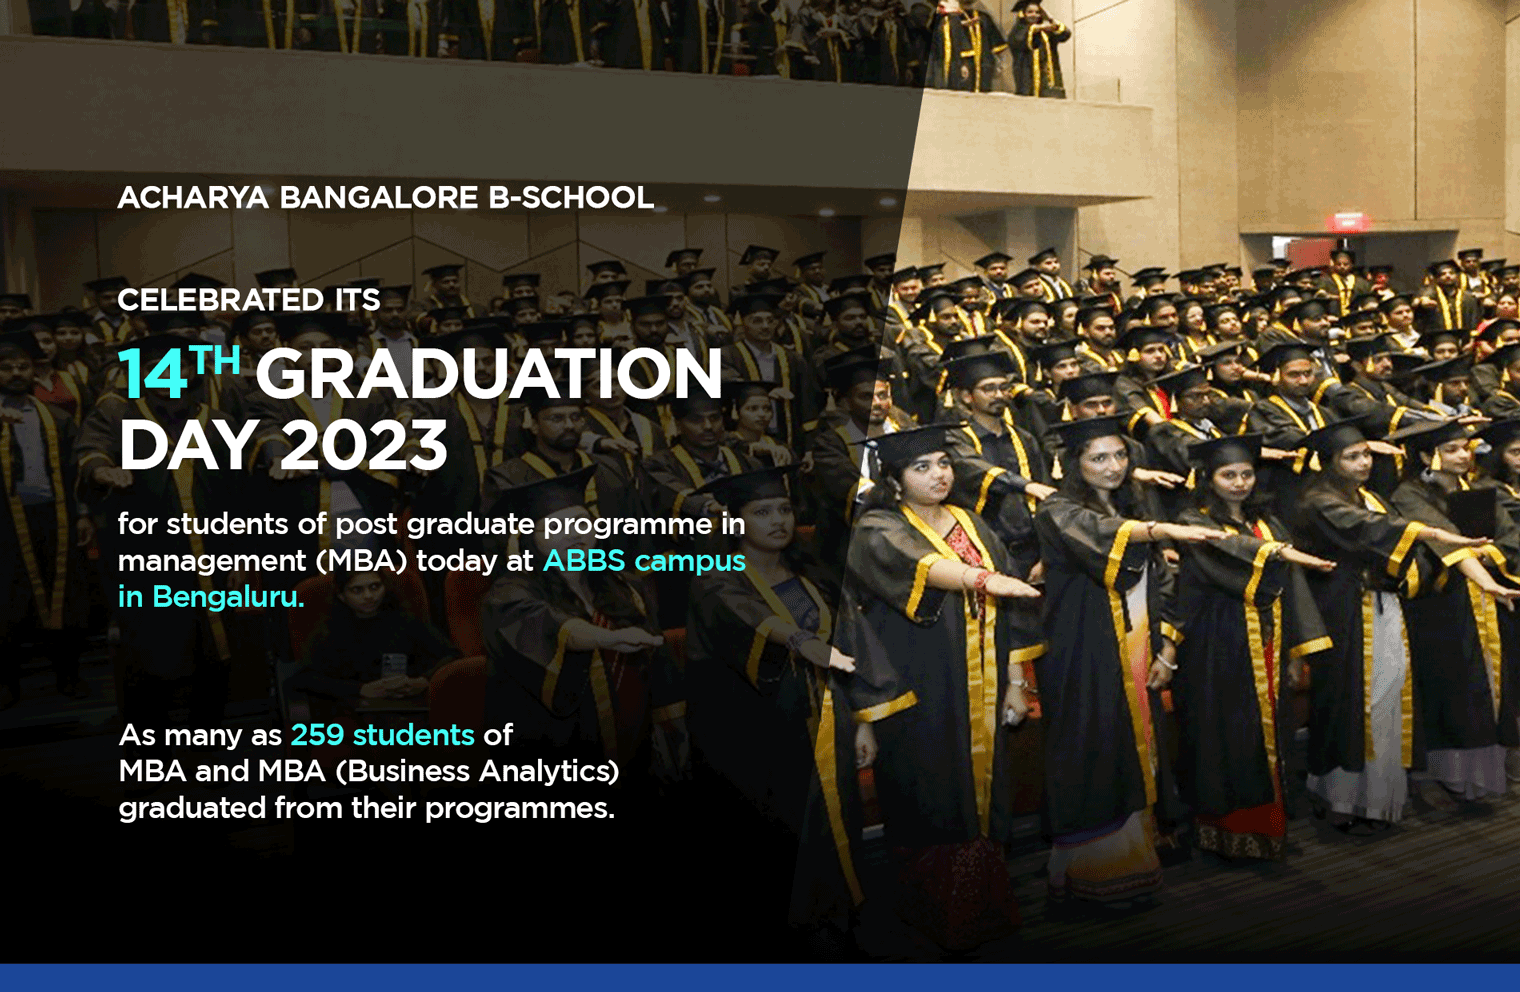 Acharya Bangalore B-school’s 14th graduation day sees 259 MBA students receive degrees banner